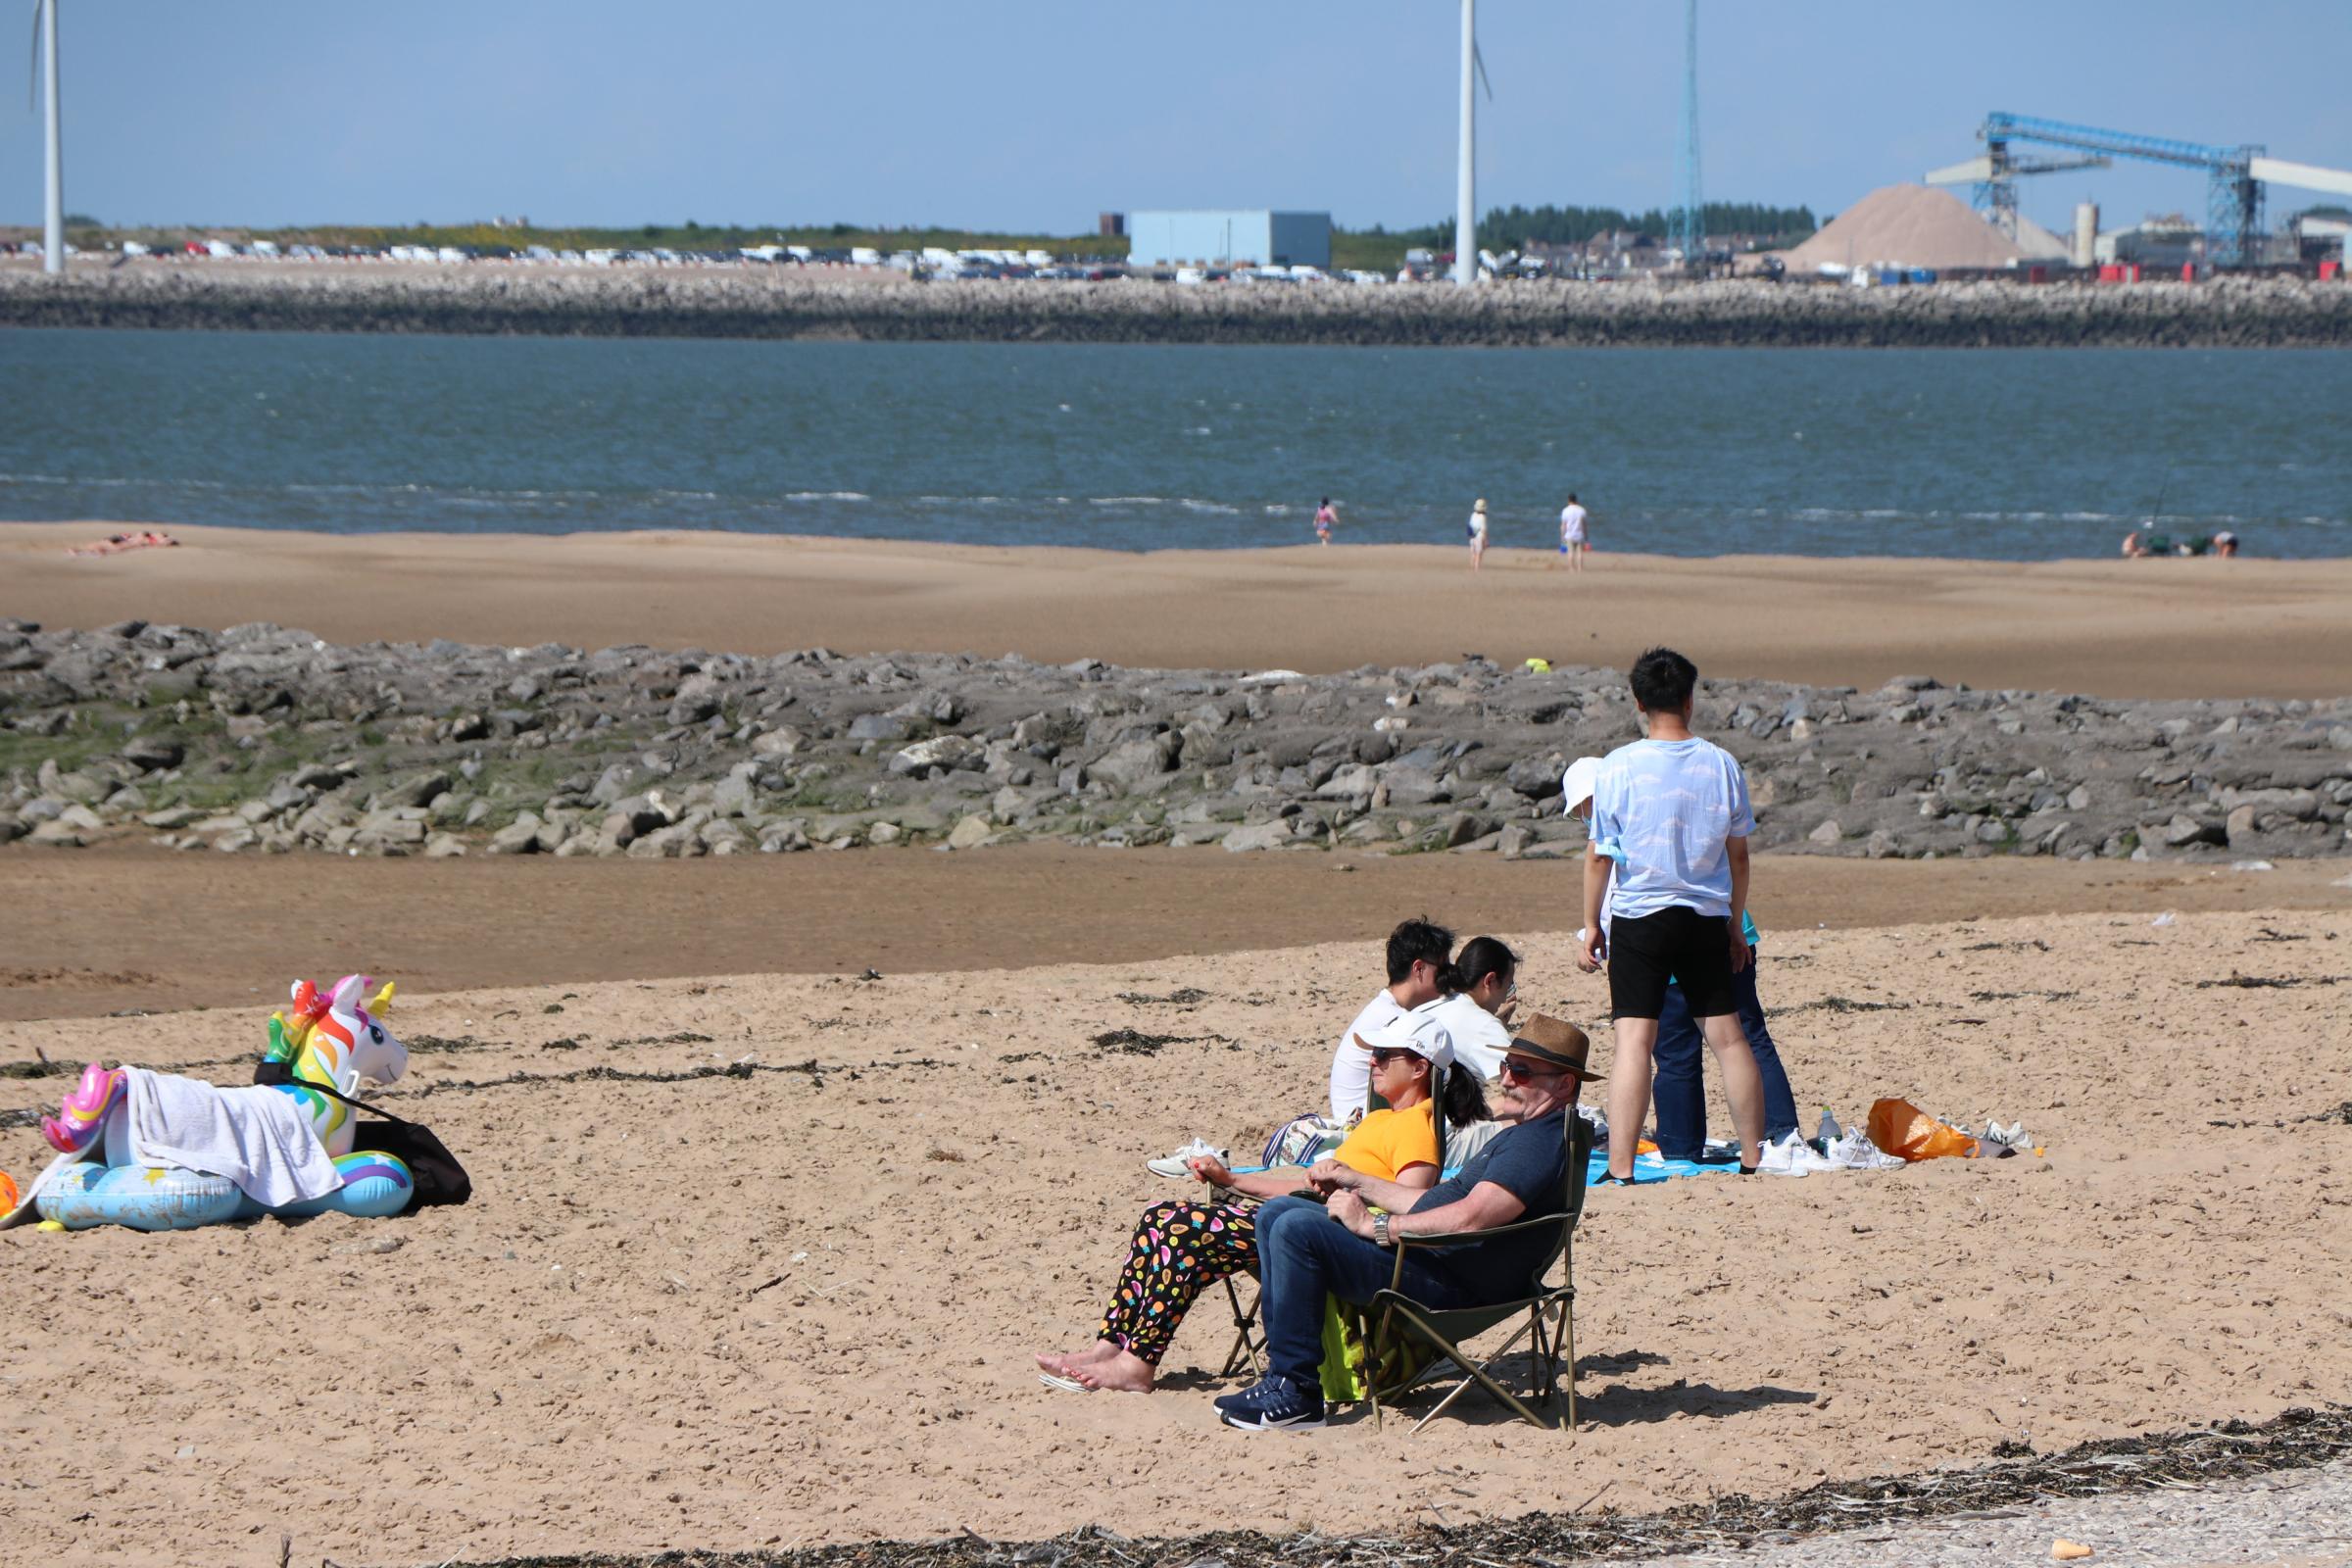 Many took advantage of the boiling hot weather by heading to the beach